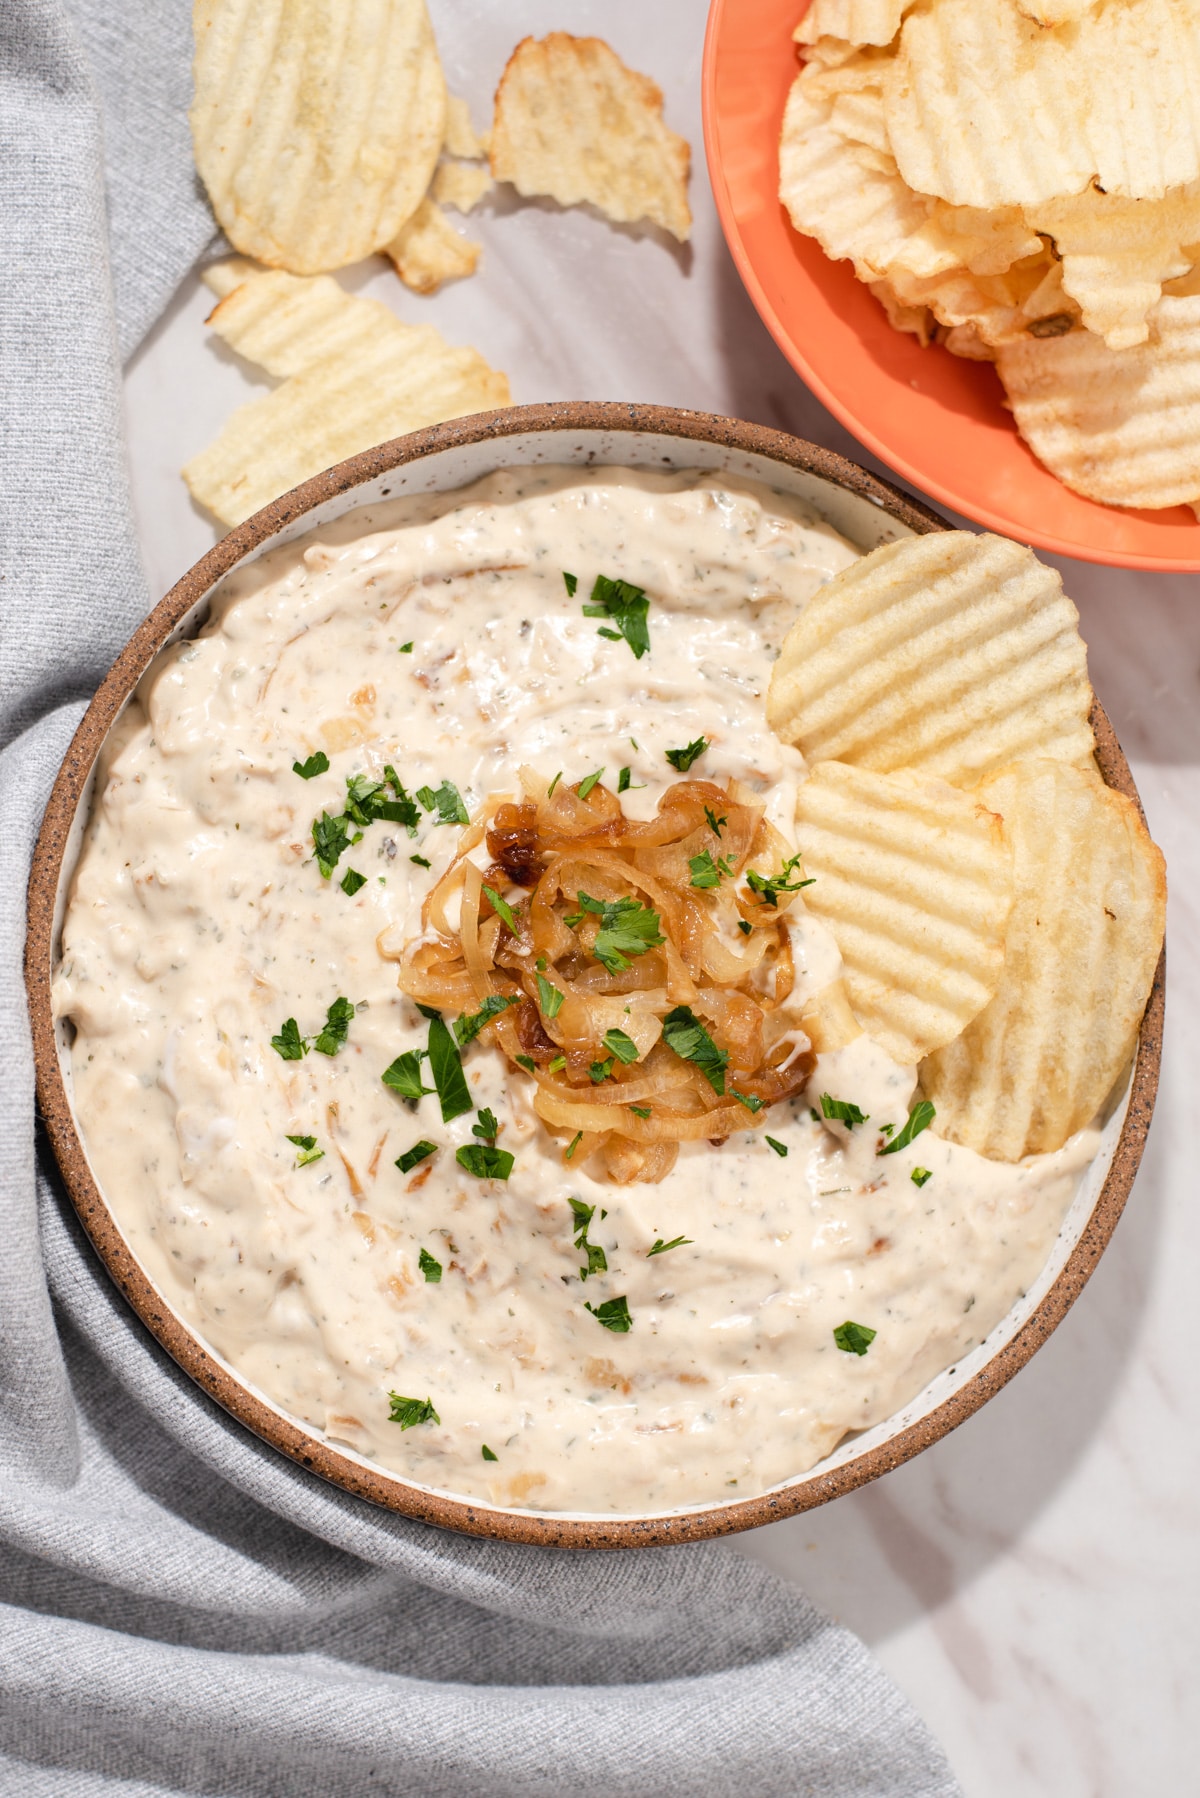 Overhead view of bowl filled with onion dip, caramelized onions, and potato chips.